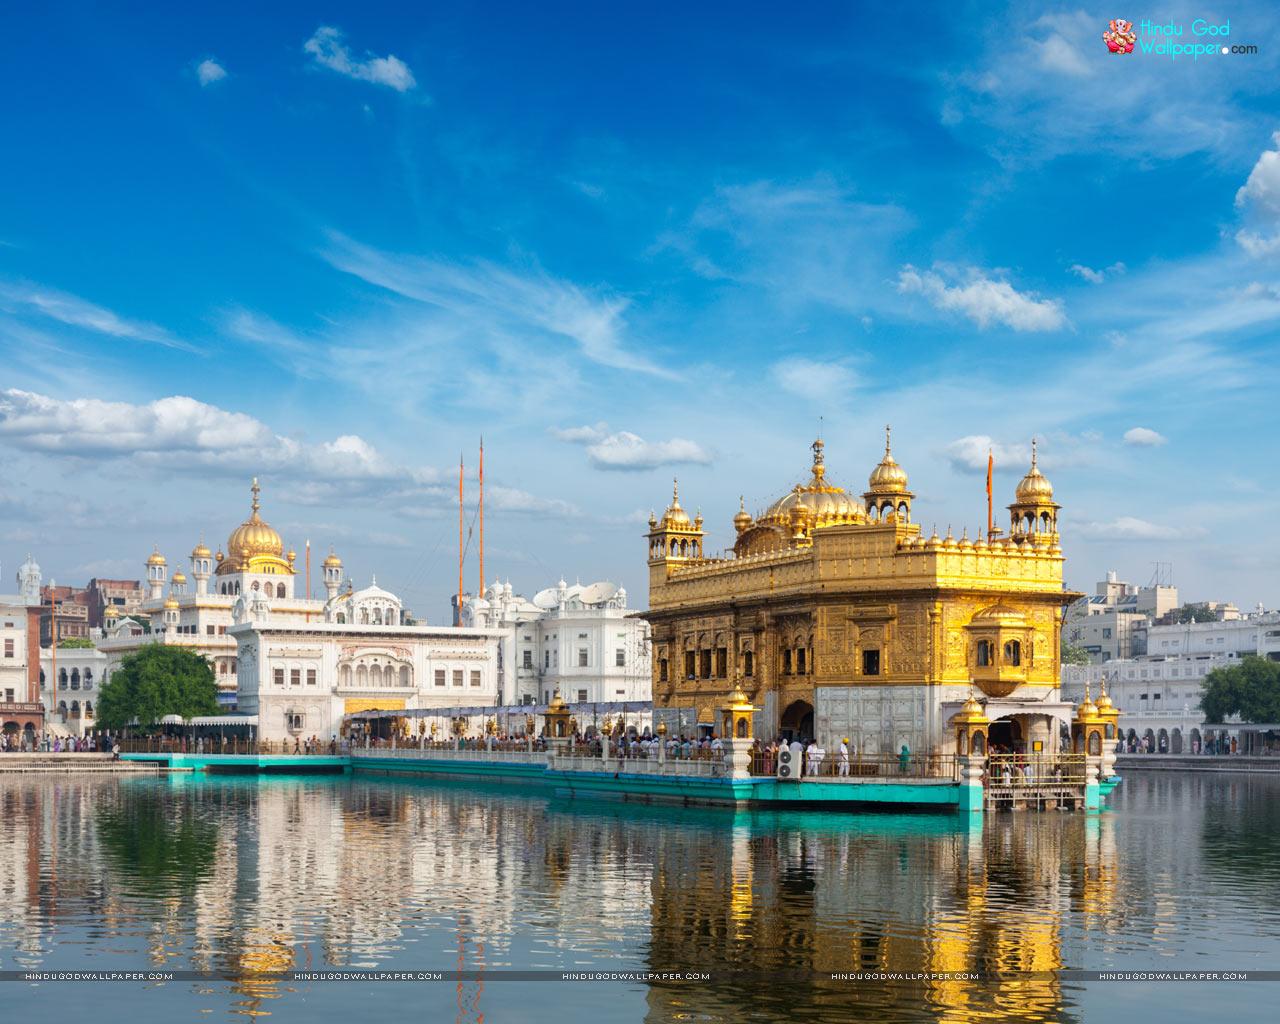 41+] Golden Temple Wallpapers Full Size